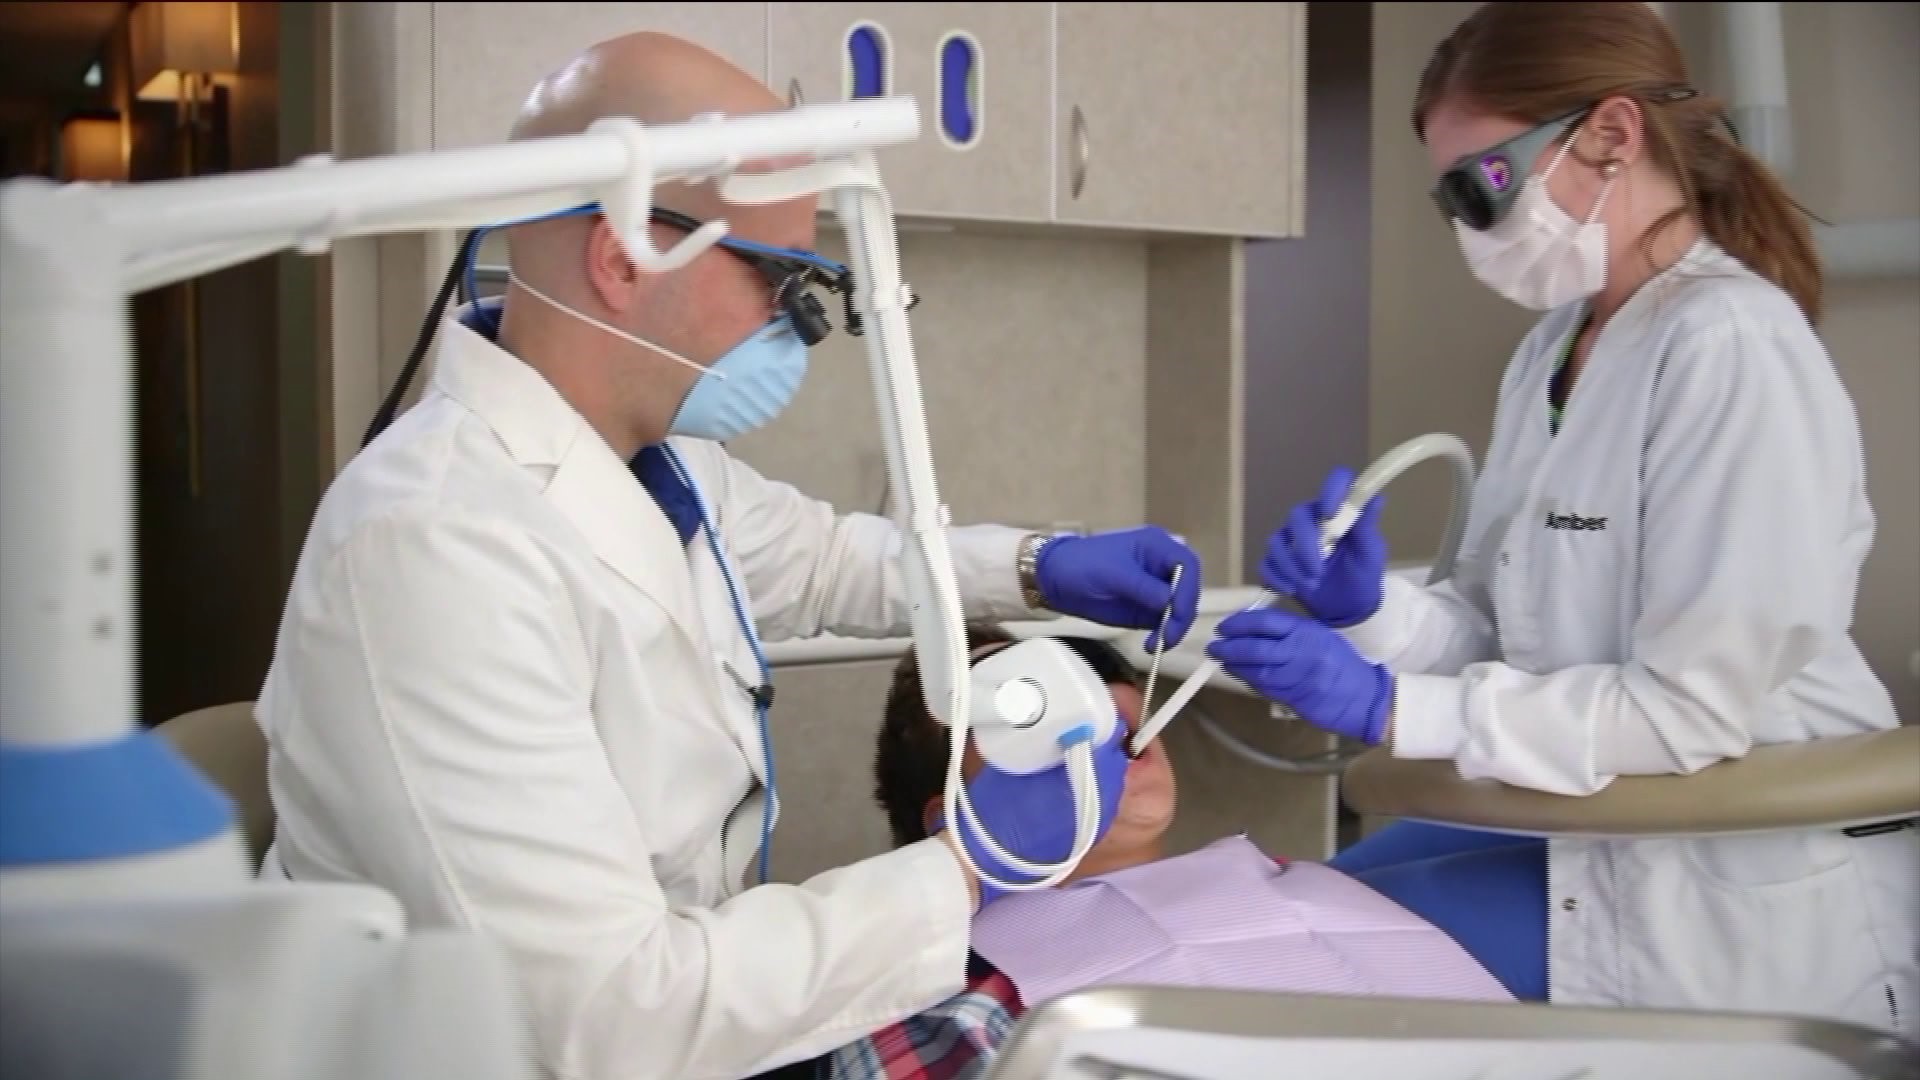 Dental laser replaces drill, promises cheaper, pain-free dentist visits